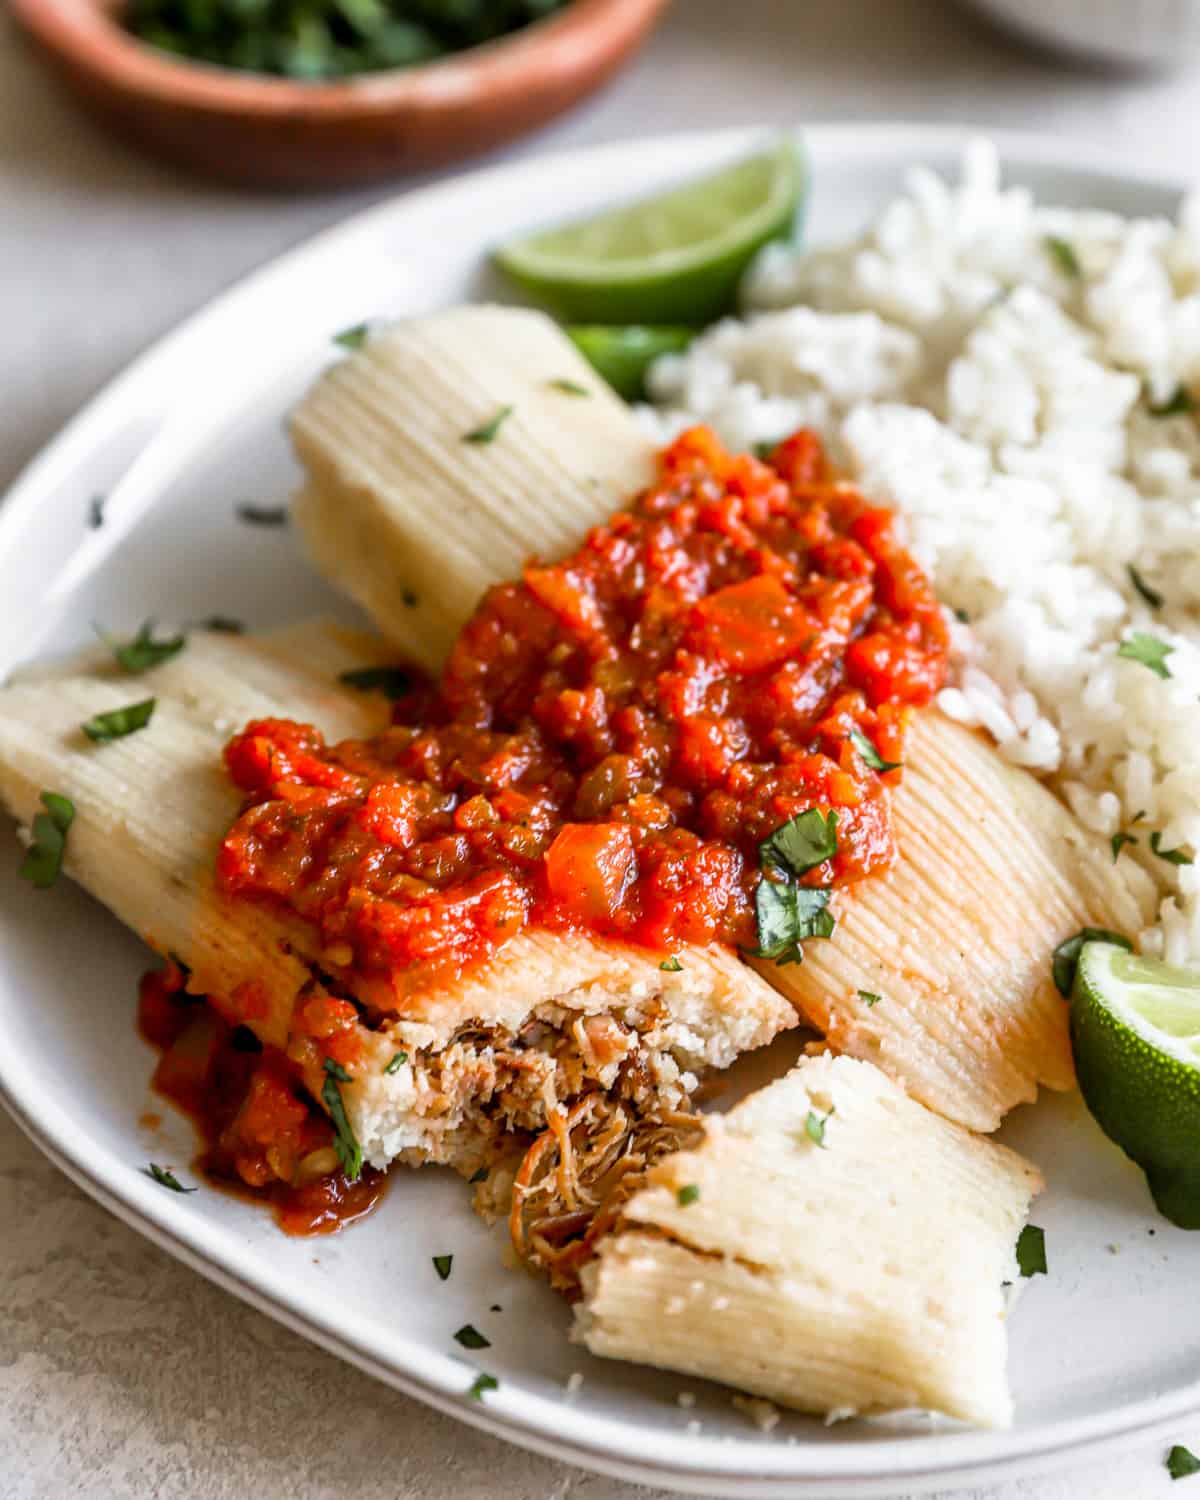 three-quarters view of 2 tamales on a white plate with cilantro rice and salsa, one tamale has been sliced into.